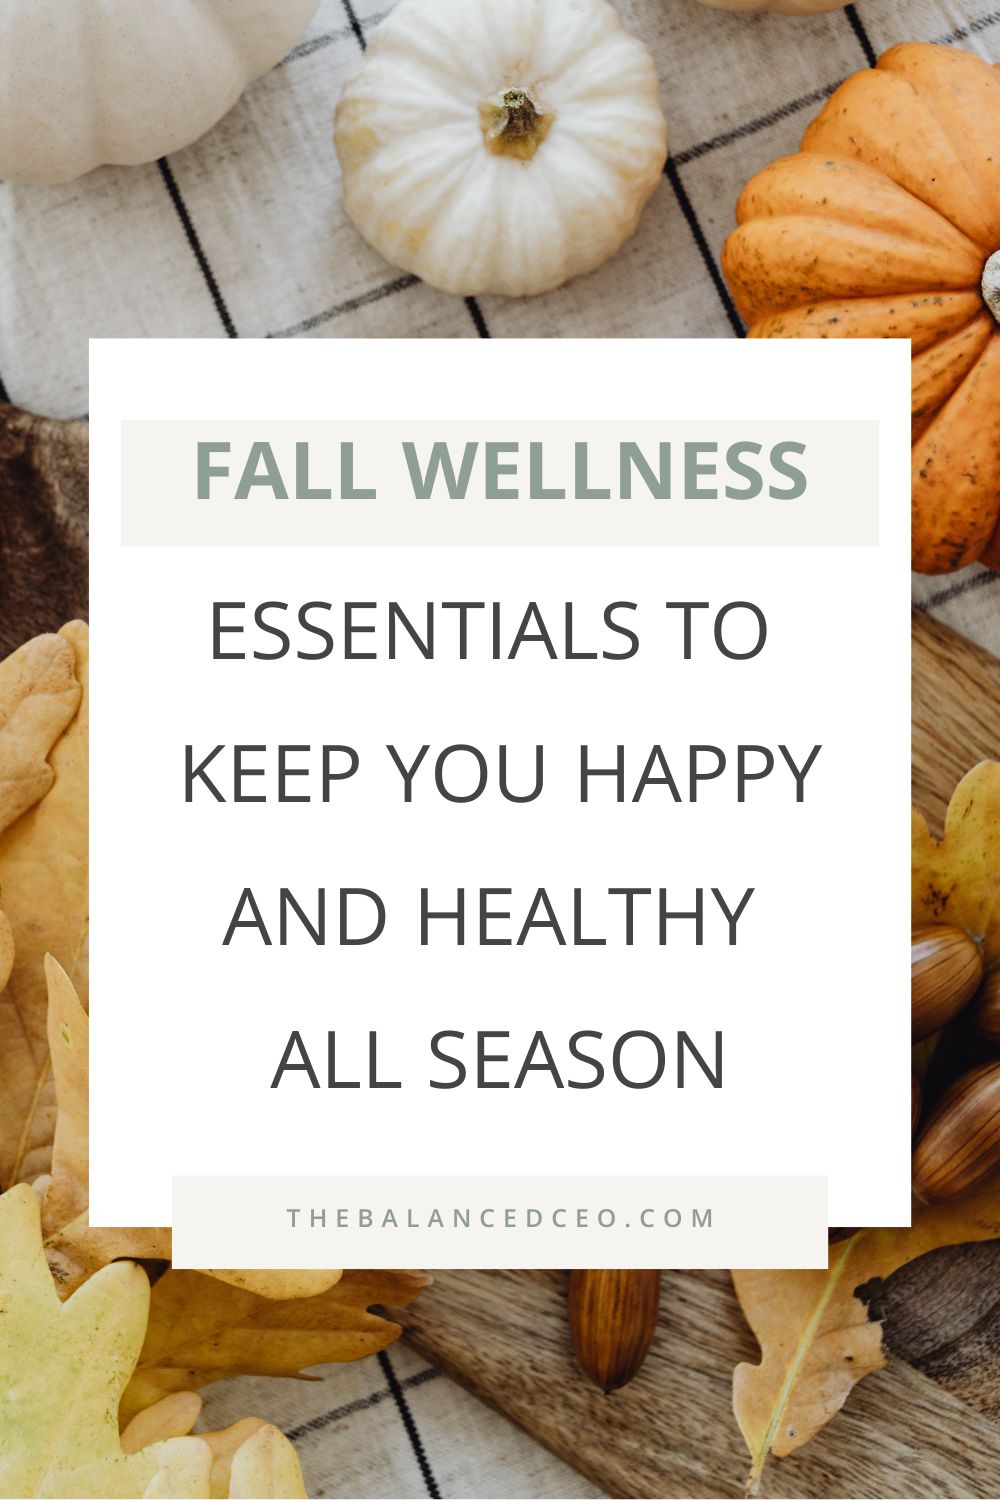 Fall Wellness Essentials to Keep You Happy and Healthy All Season